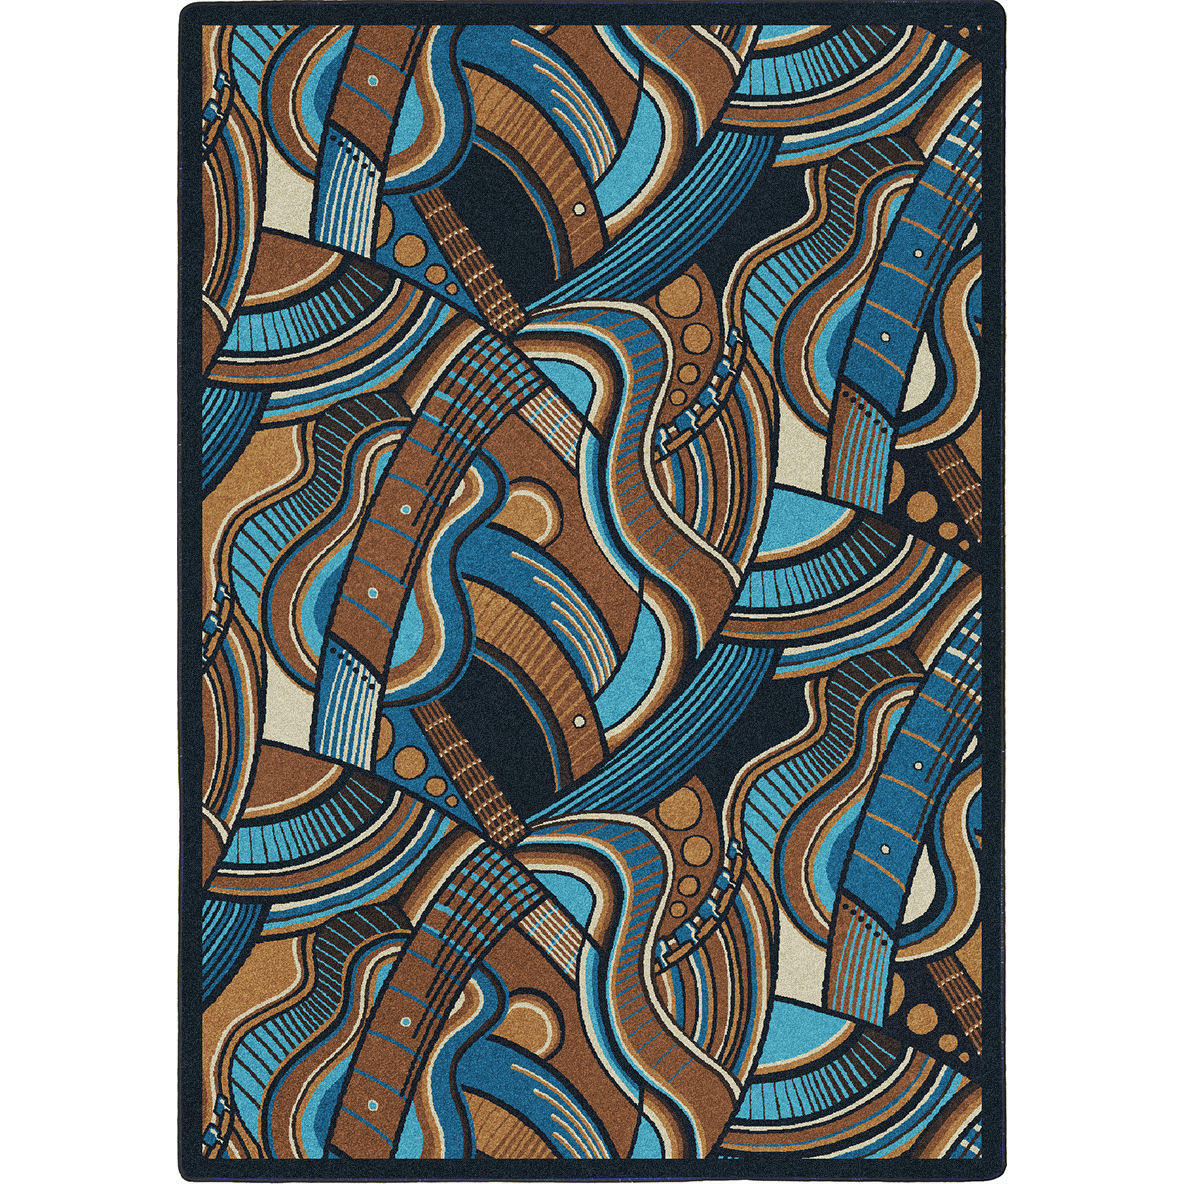 46-Inch by 64-Inch by 0.36-Inch Dark Army Joy Carpets Kaleidoscope Funky Camo Whimsical Area Rugs 